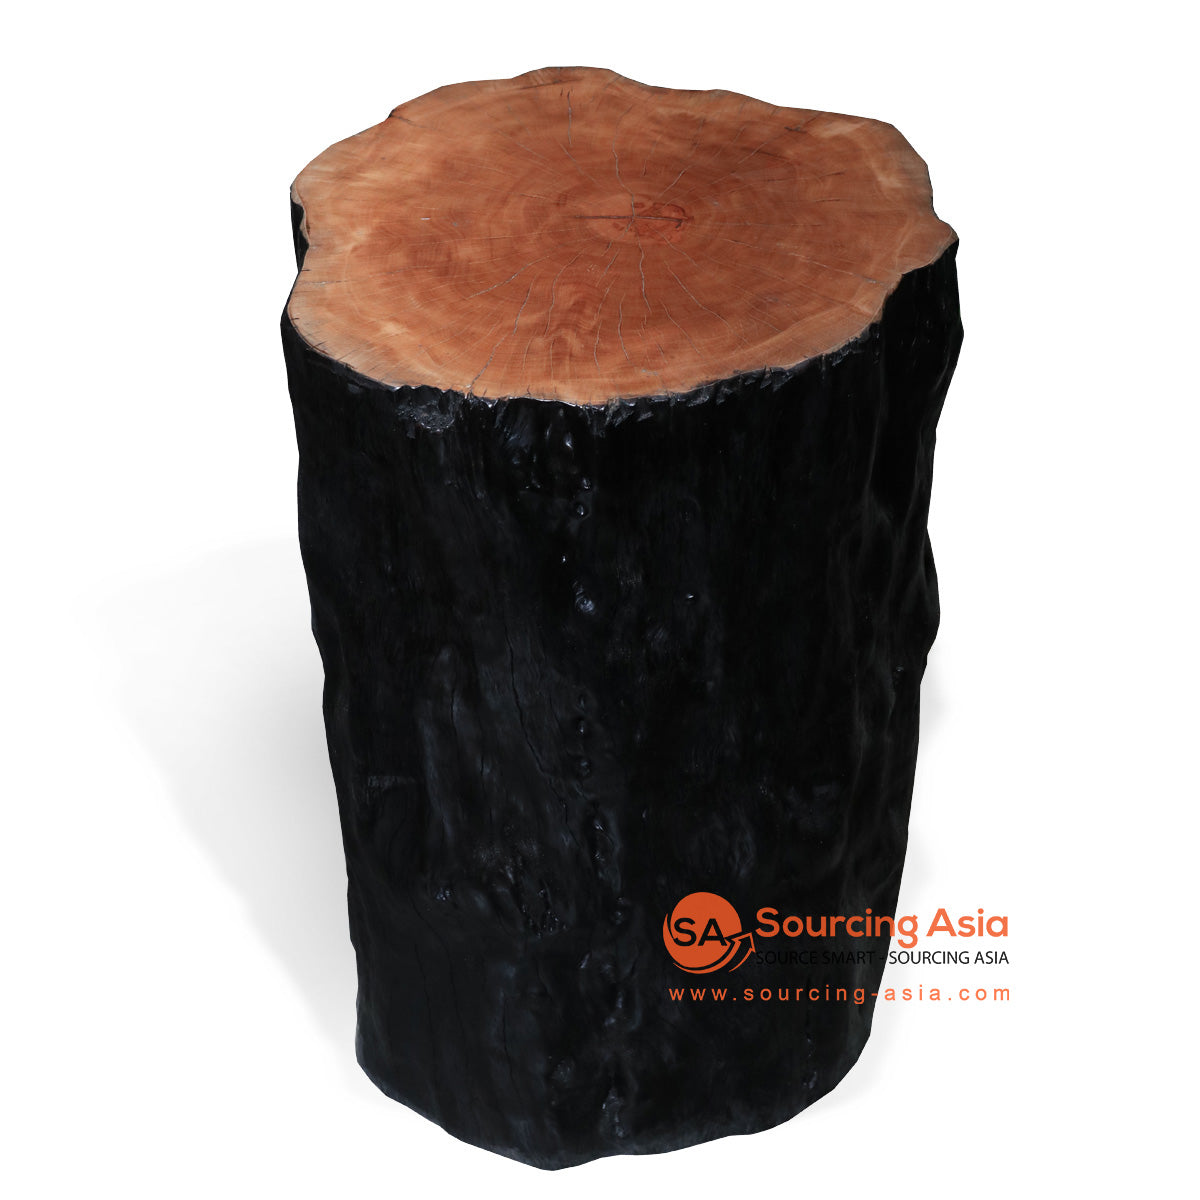 BMW270 BLACK LYCHEE WOOD STOOL AND SIDE TABLE